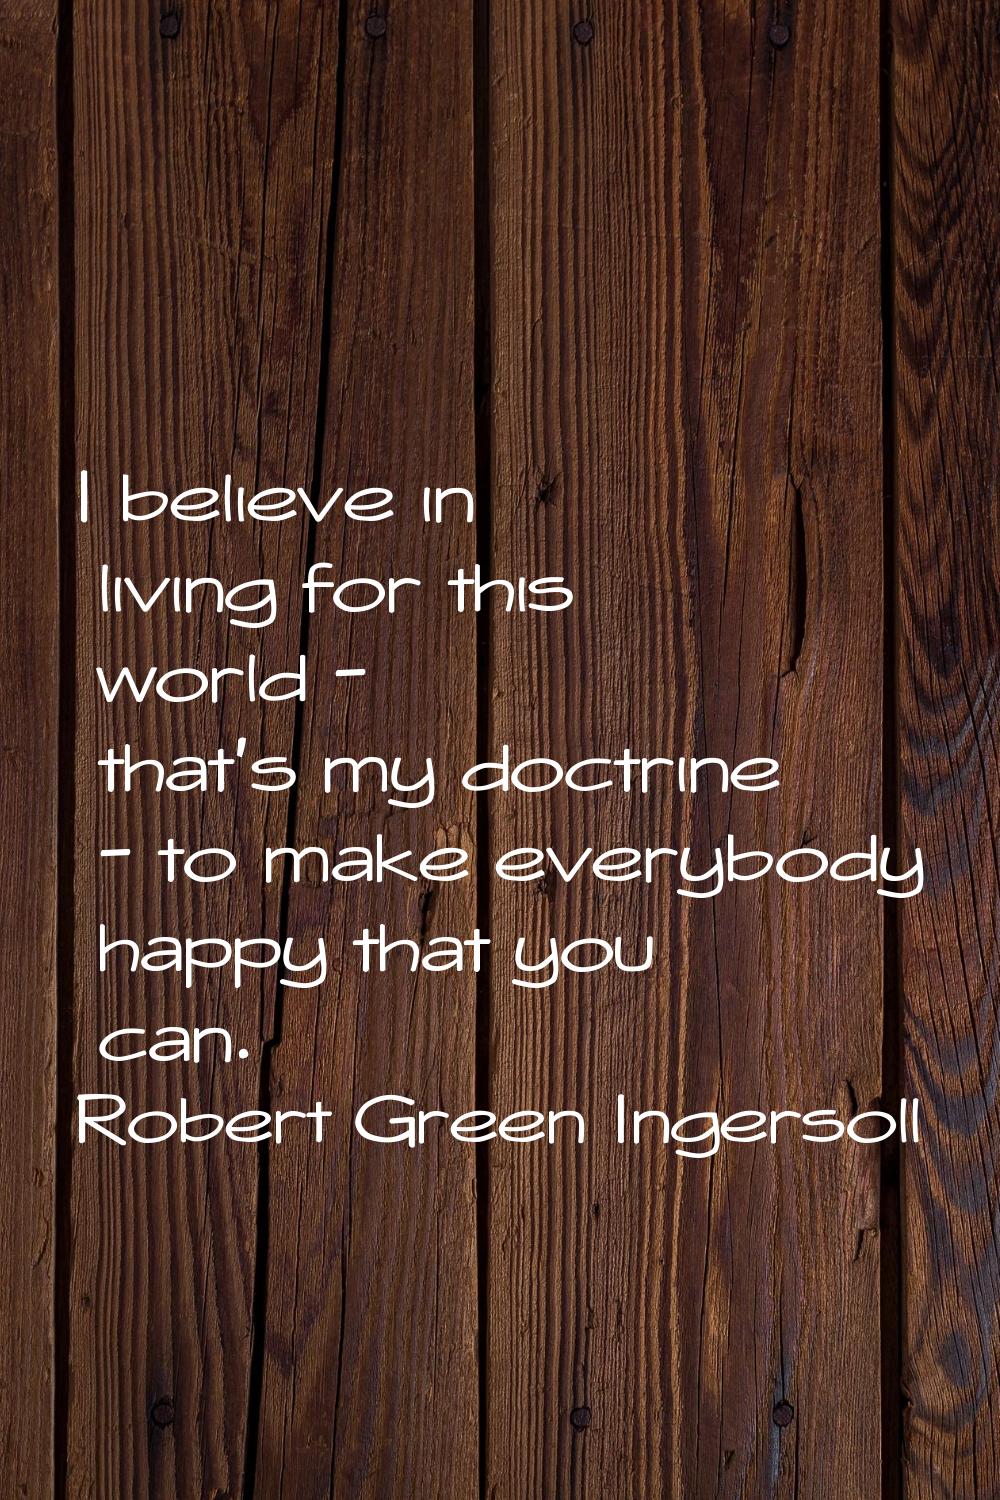 I believe in living for this world - that's my doctrine - to make everybody happy that you can.